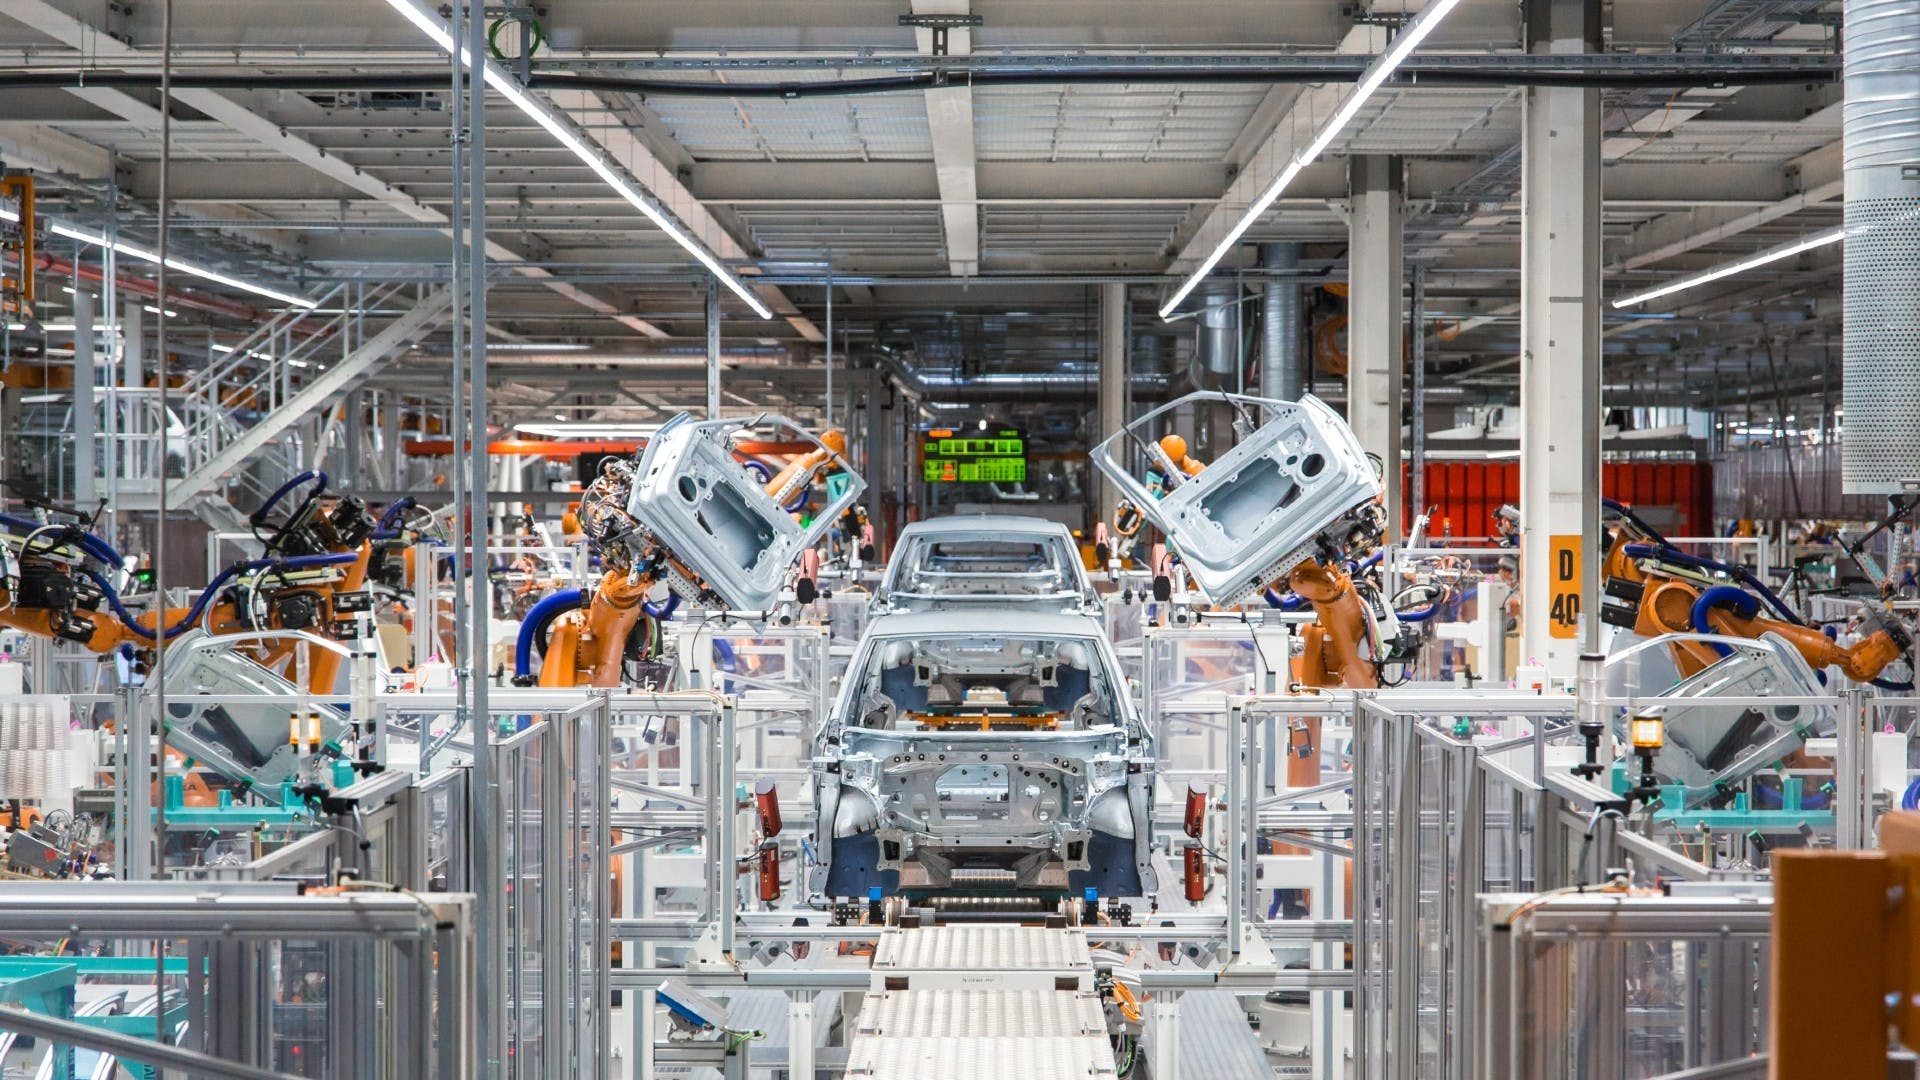 Rapid factory evolution for the automotive industry – Gain visibility into your production processes by upgrading legacy equipment with smart technologies